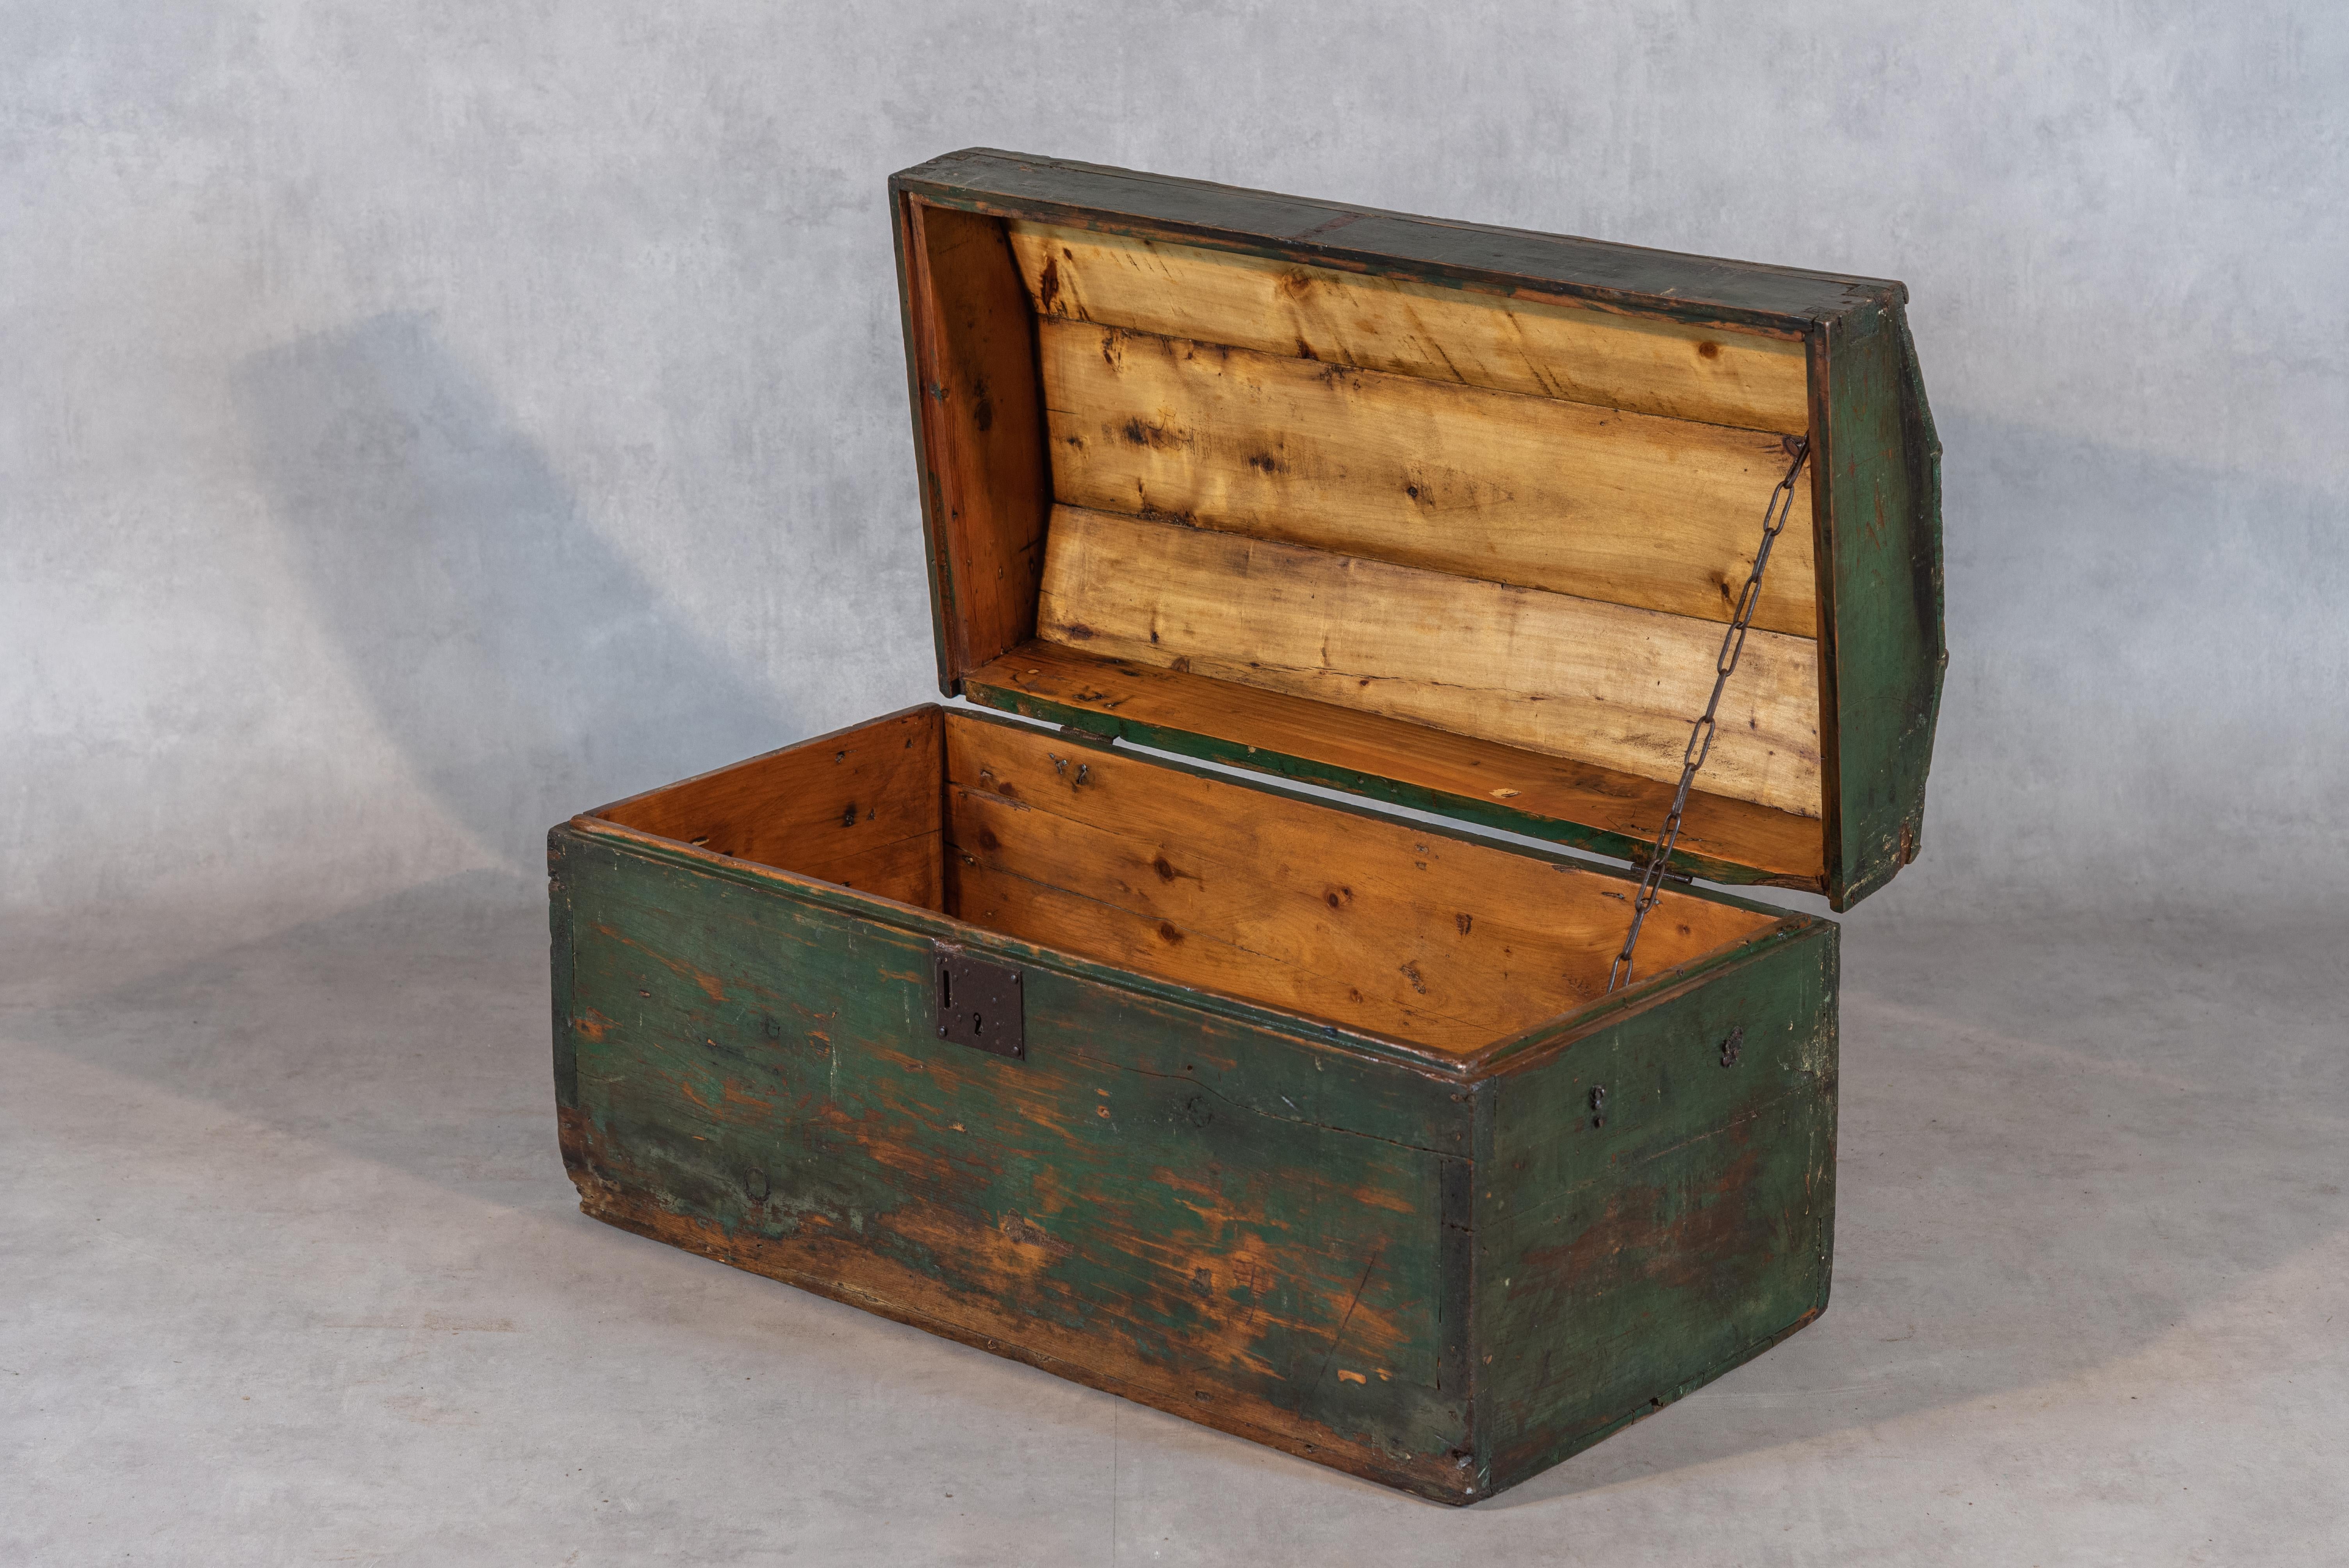 An exceptional French chest with its original green patina from the early 20th century.